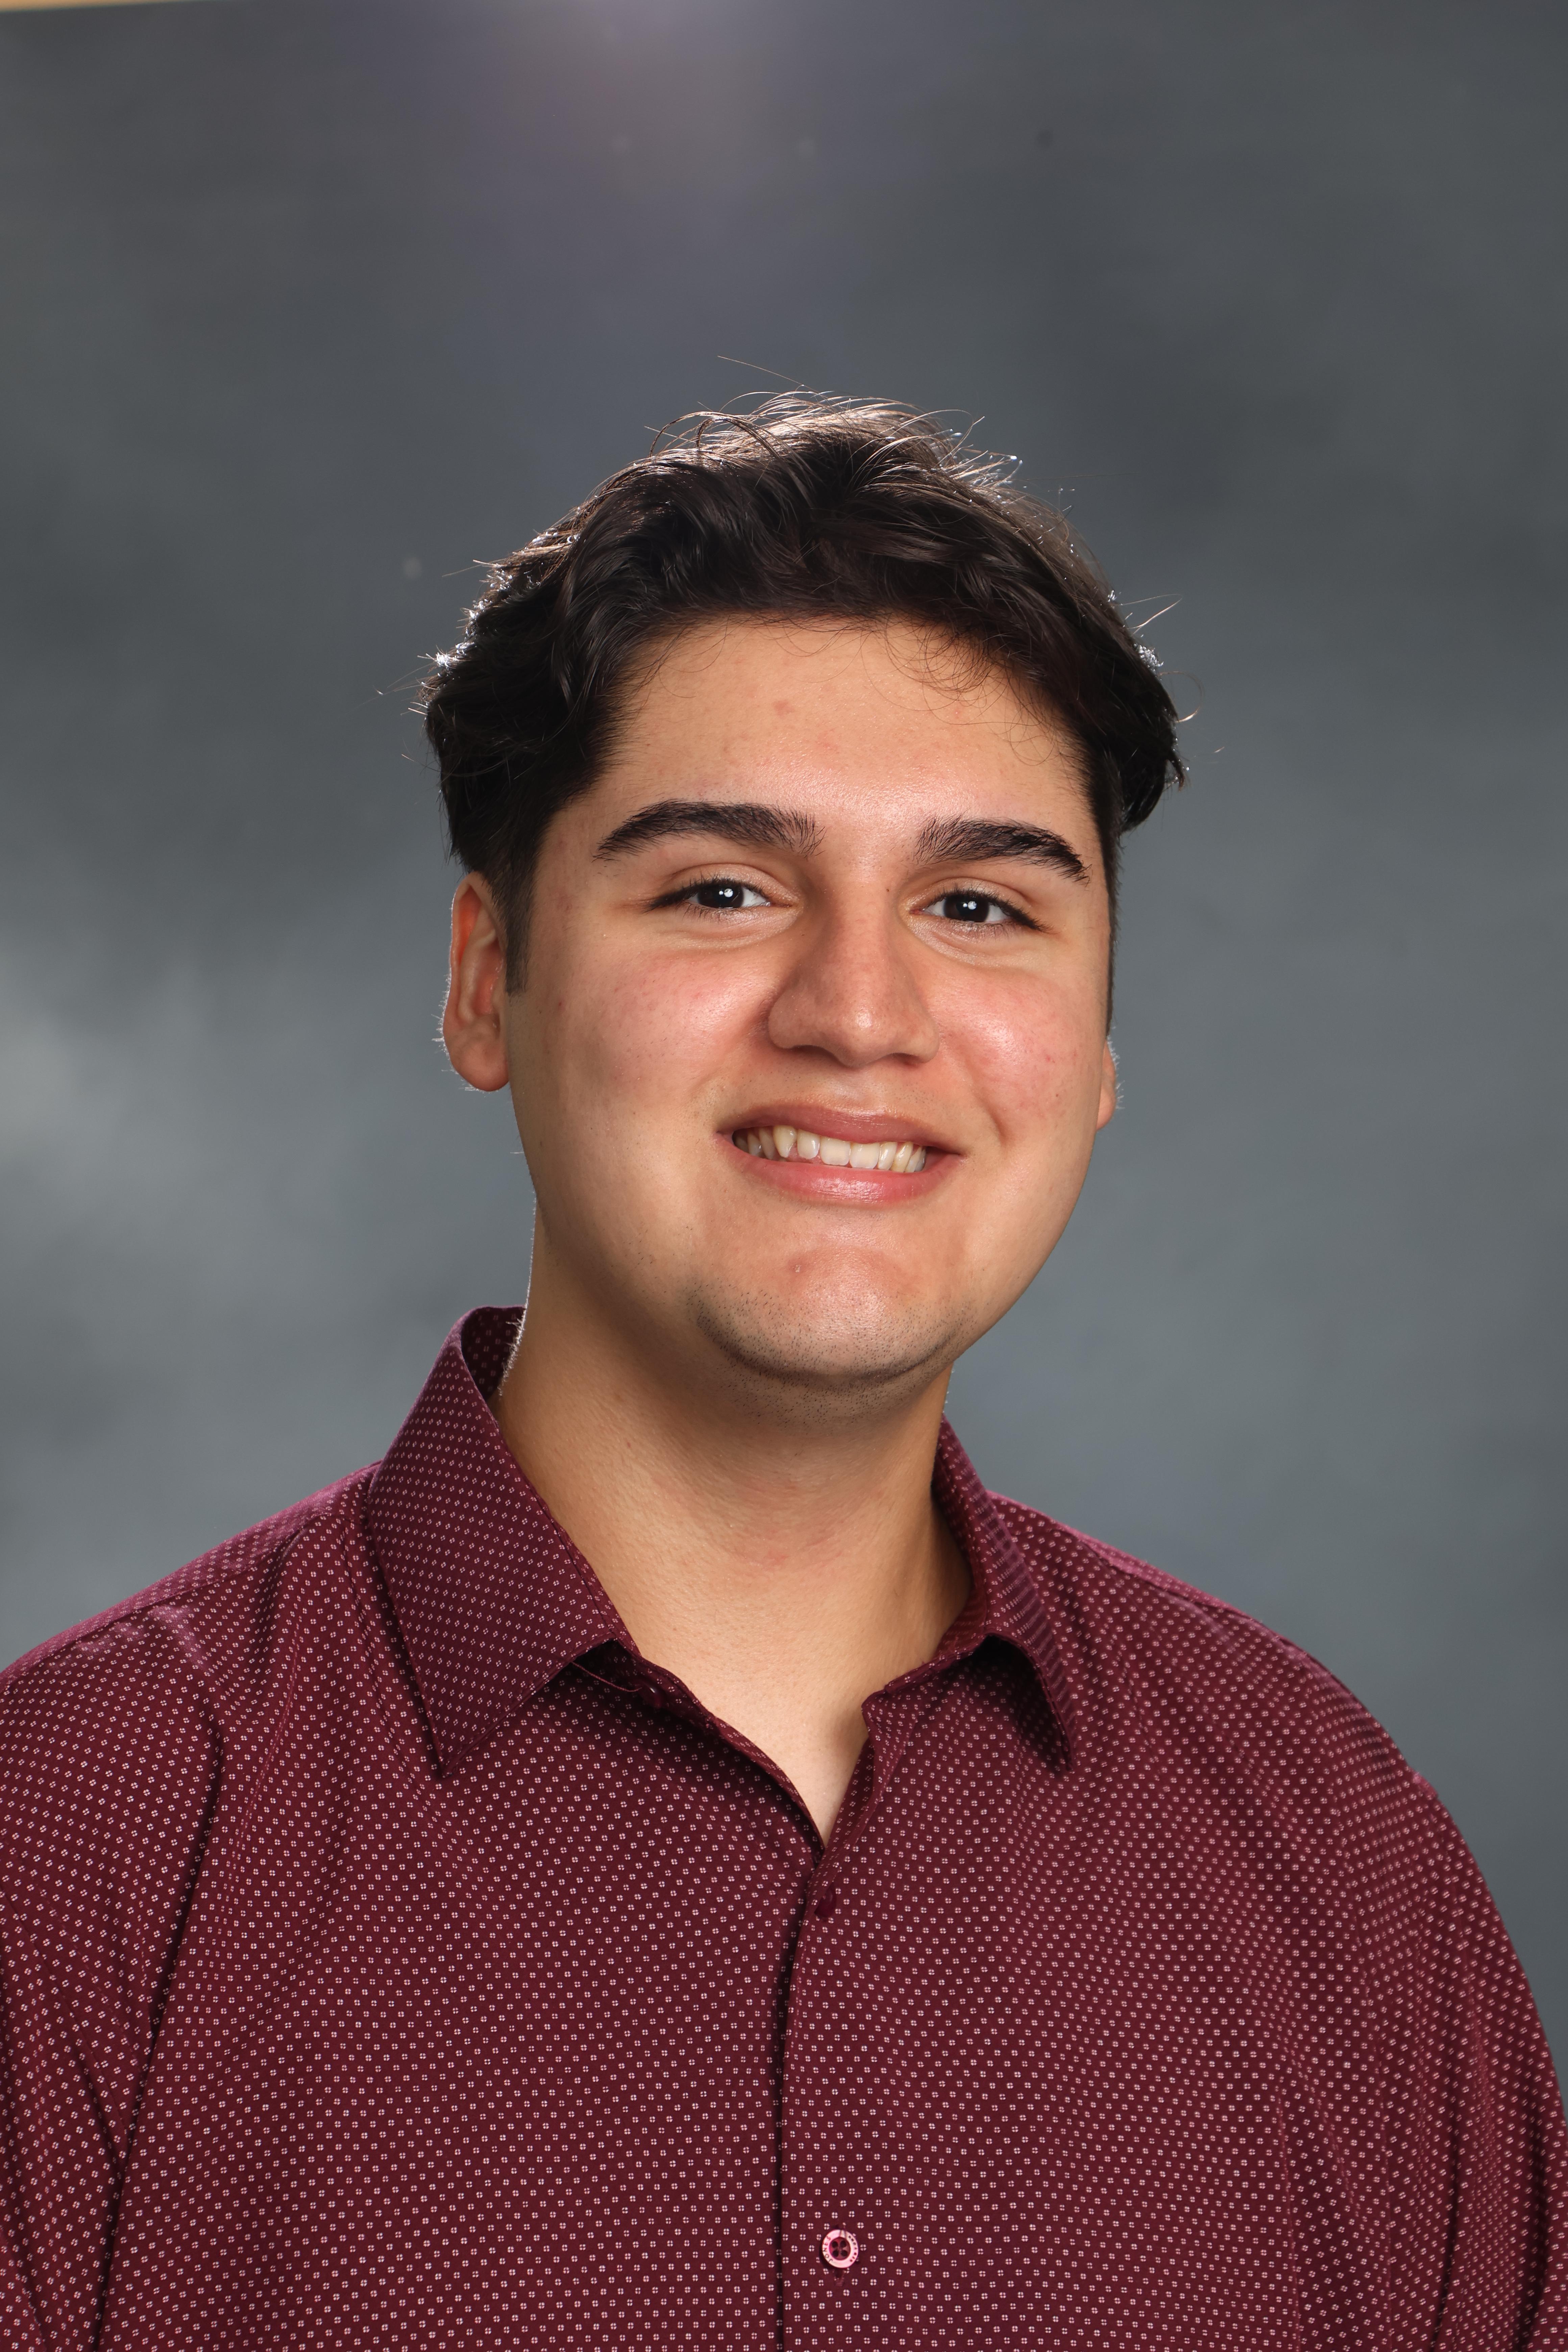 Willowbrook senior named as ILMEA All-State Musician